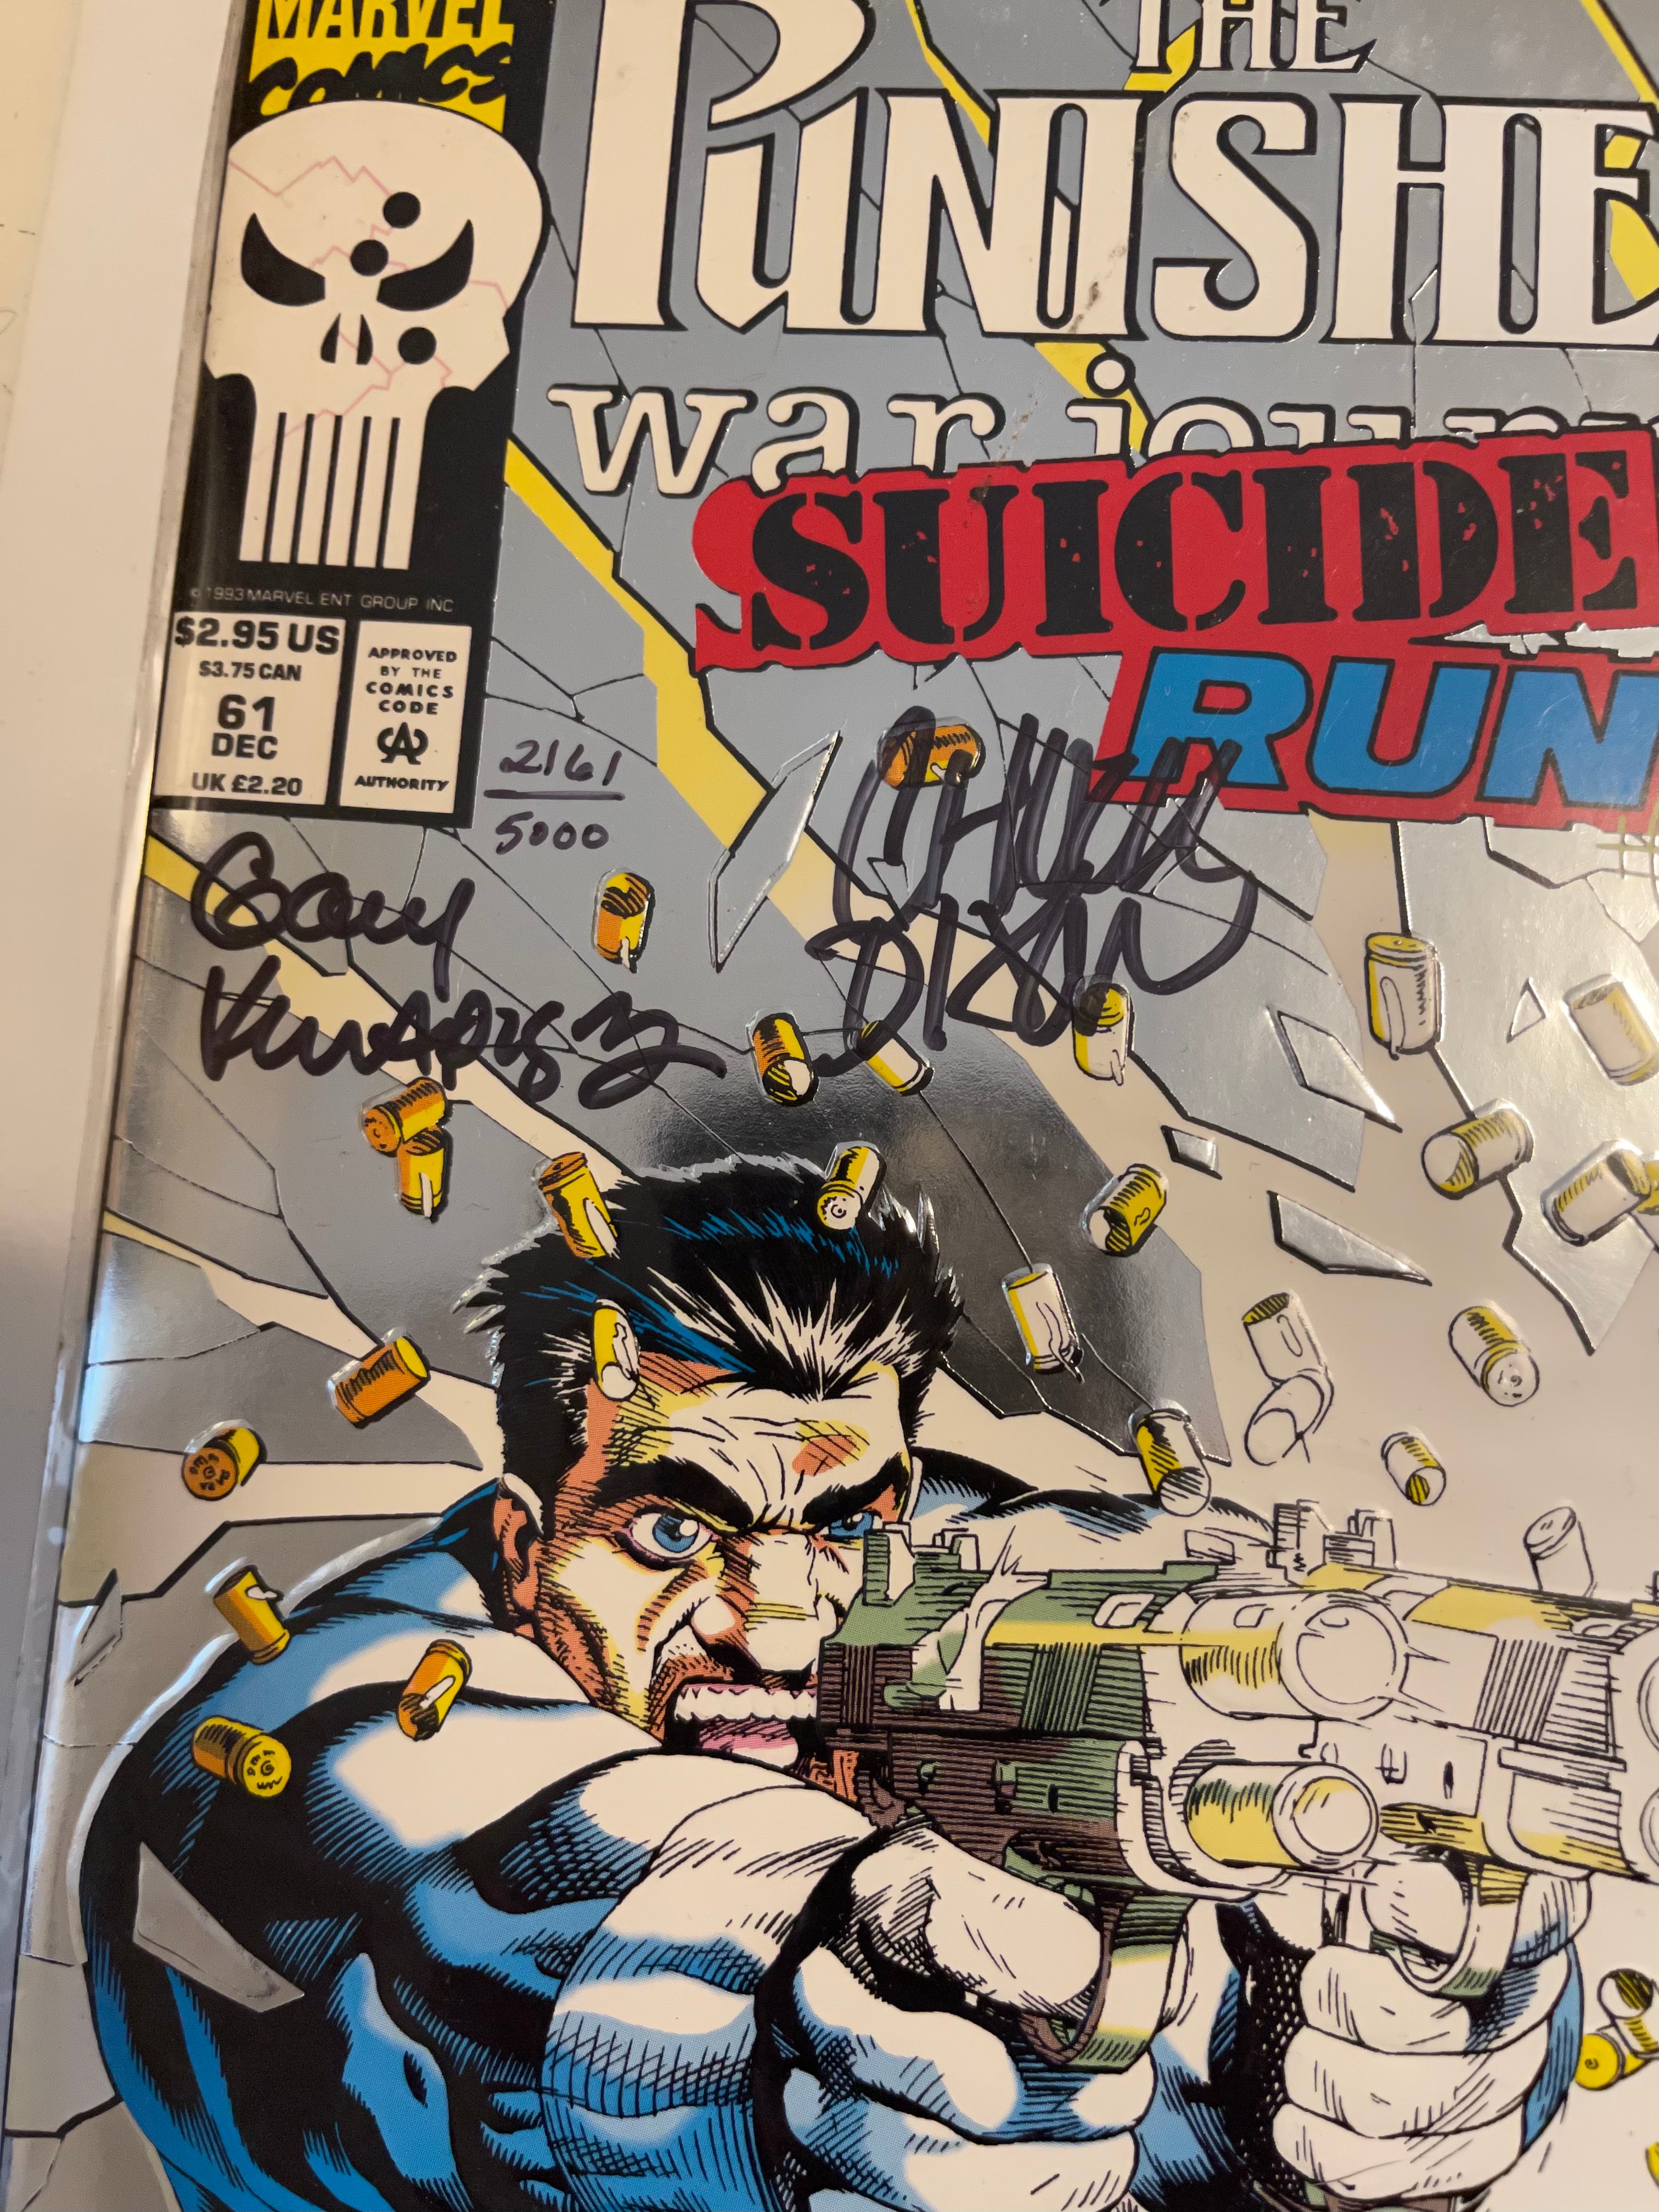 The Punisher War Journal double autograph by  artists comic book with COA